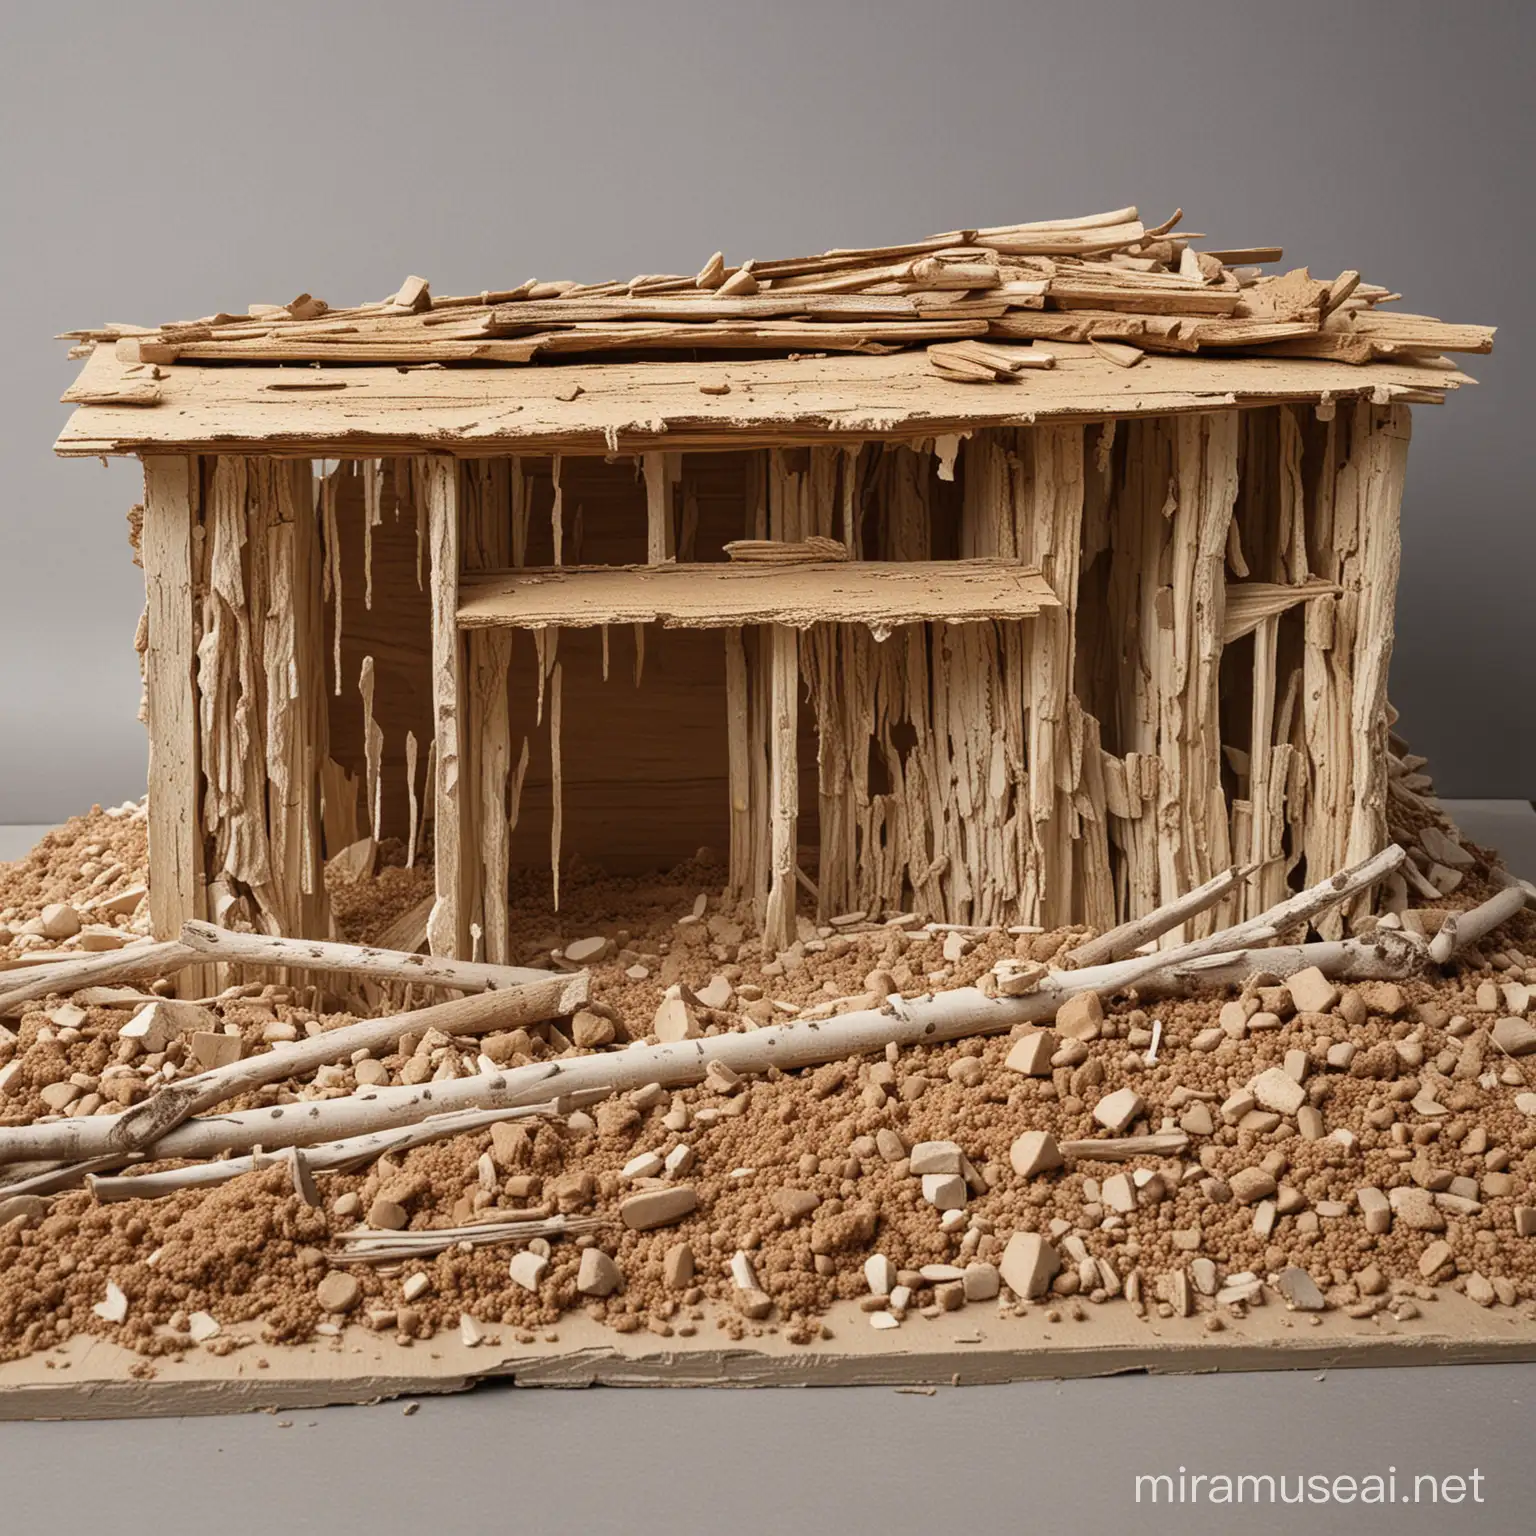  A model of the gap beneath a timber house that has been ripped up and transported away. The gap should be a cast set of layered materials combined with compressed birch bark. It should only be the gap the house has gone. It should be cast from plaster


